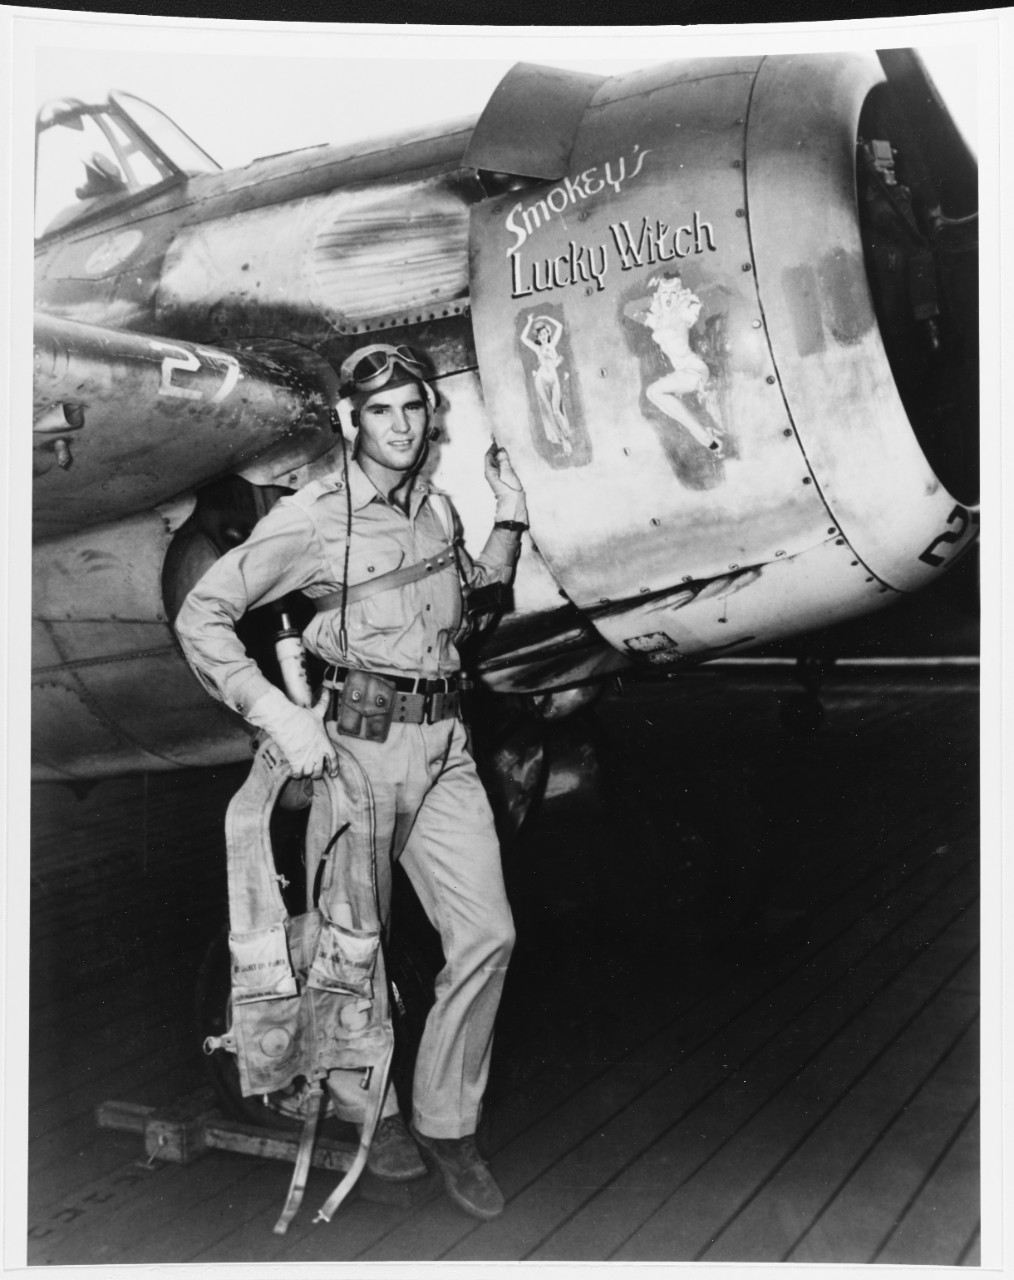 Ens. Darrell C. Bennett, USNR, stands beside “Smokey’s Lucky Witch”, his FM-2 Wildcat, on board Gambier Bay, 1 August 1944. Bennett strikes a jaunty pose carrying a Colt .45 cal. M1911A1 pistol in a shoulder holster as he leans on the fuselage an...